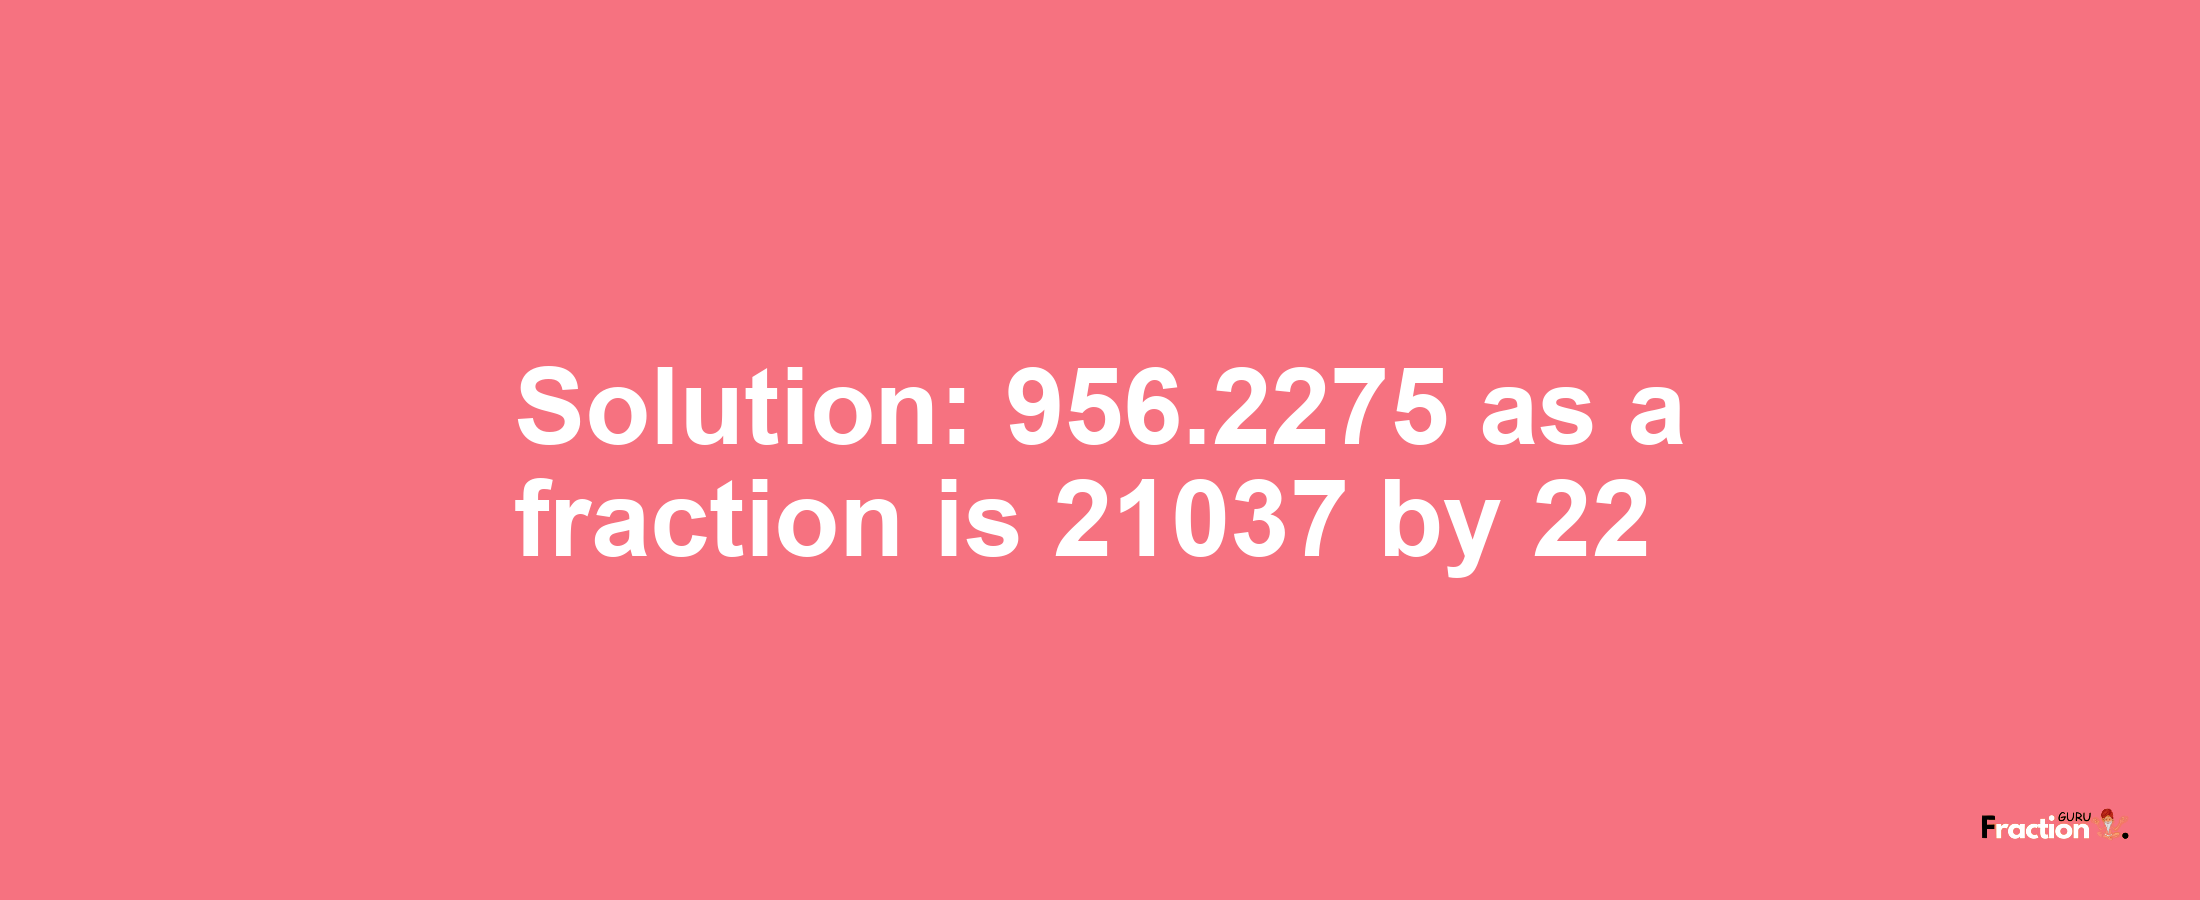 Solution:956.2275 as a fraction is 21037/22